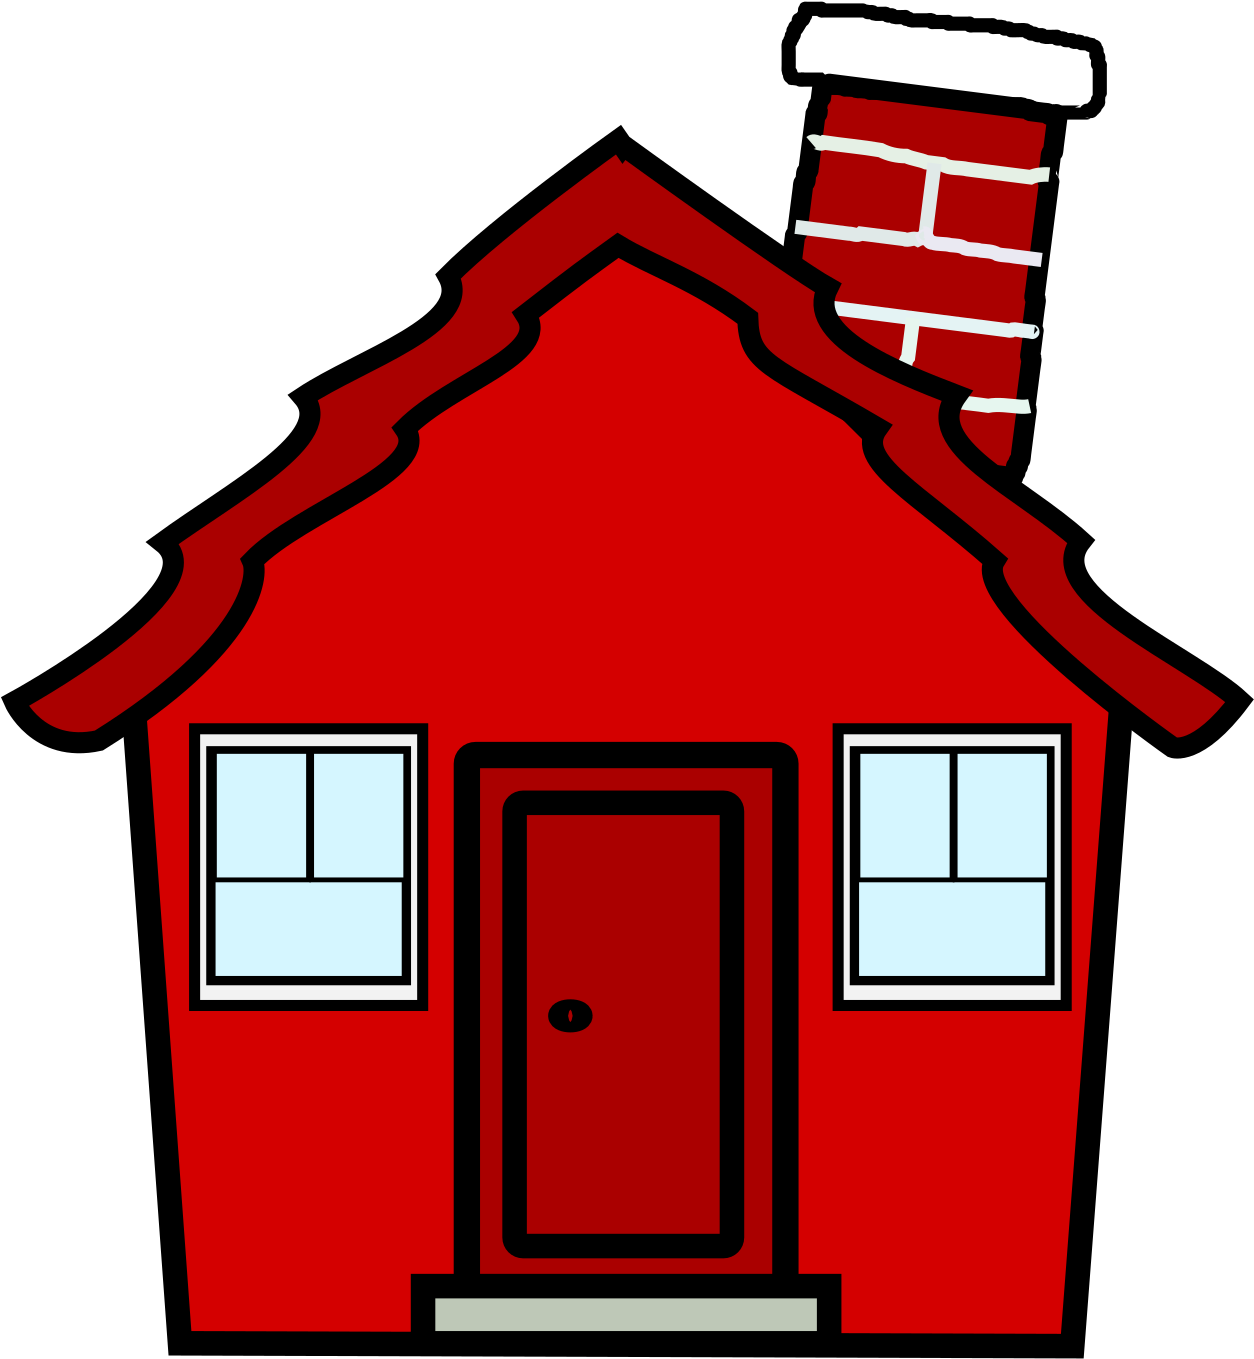 A Red House With A Chimney